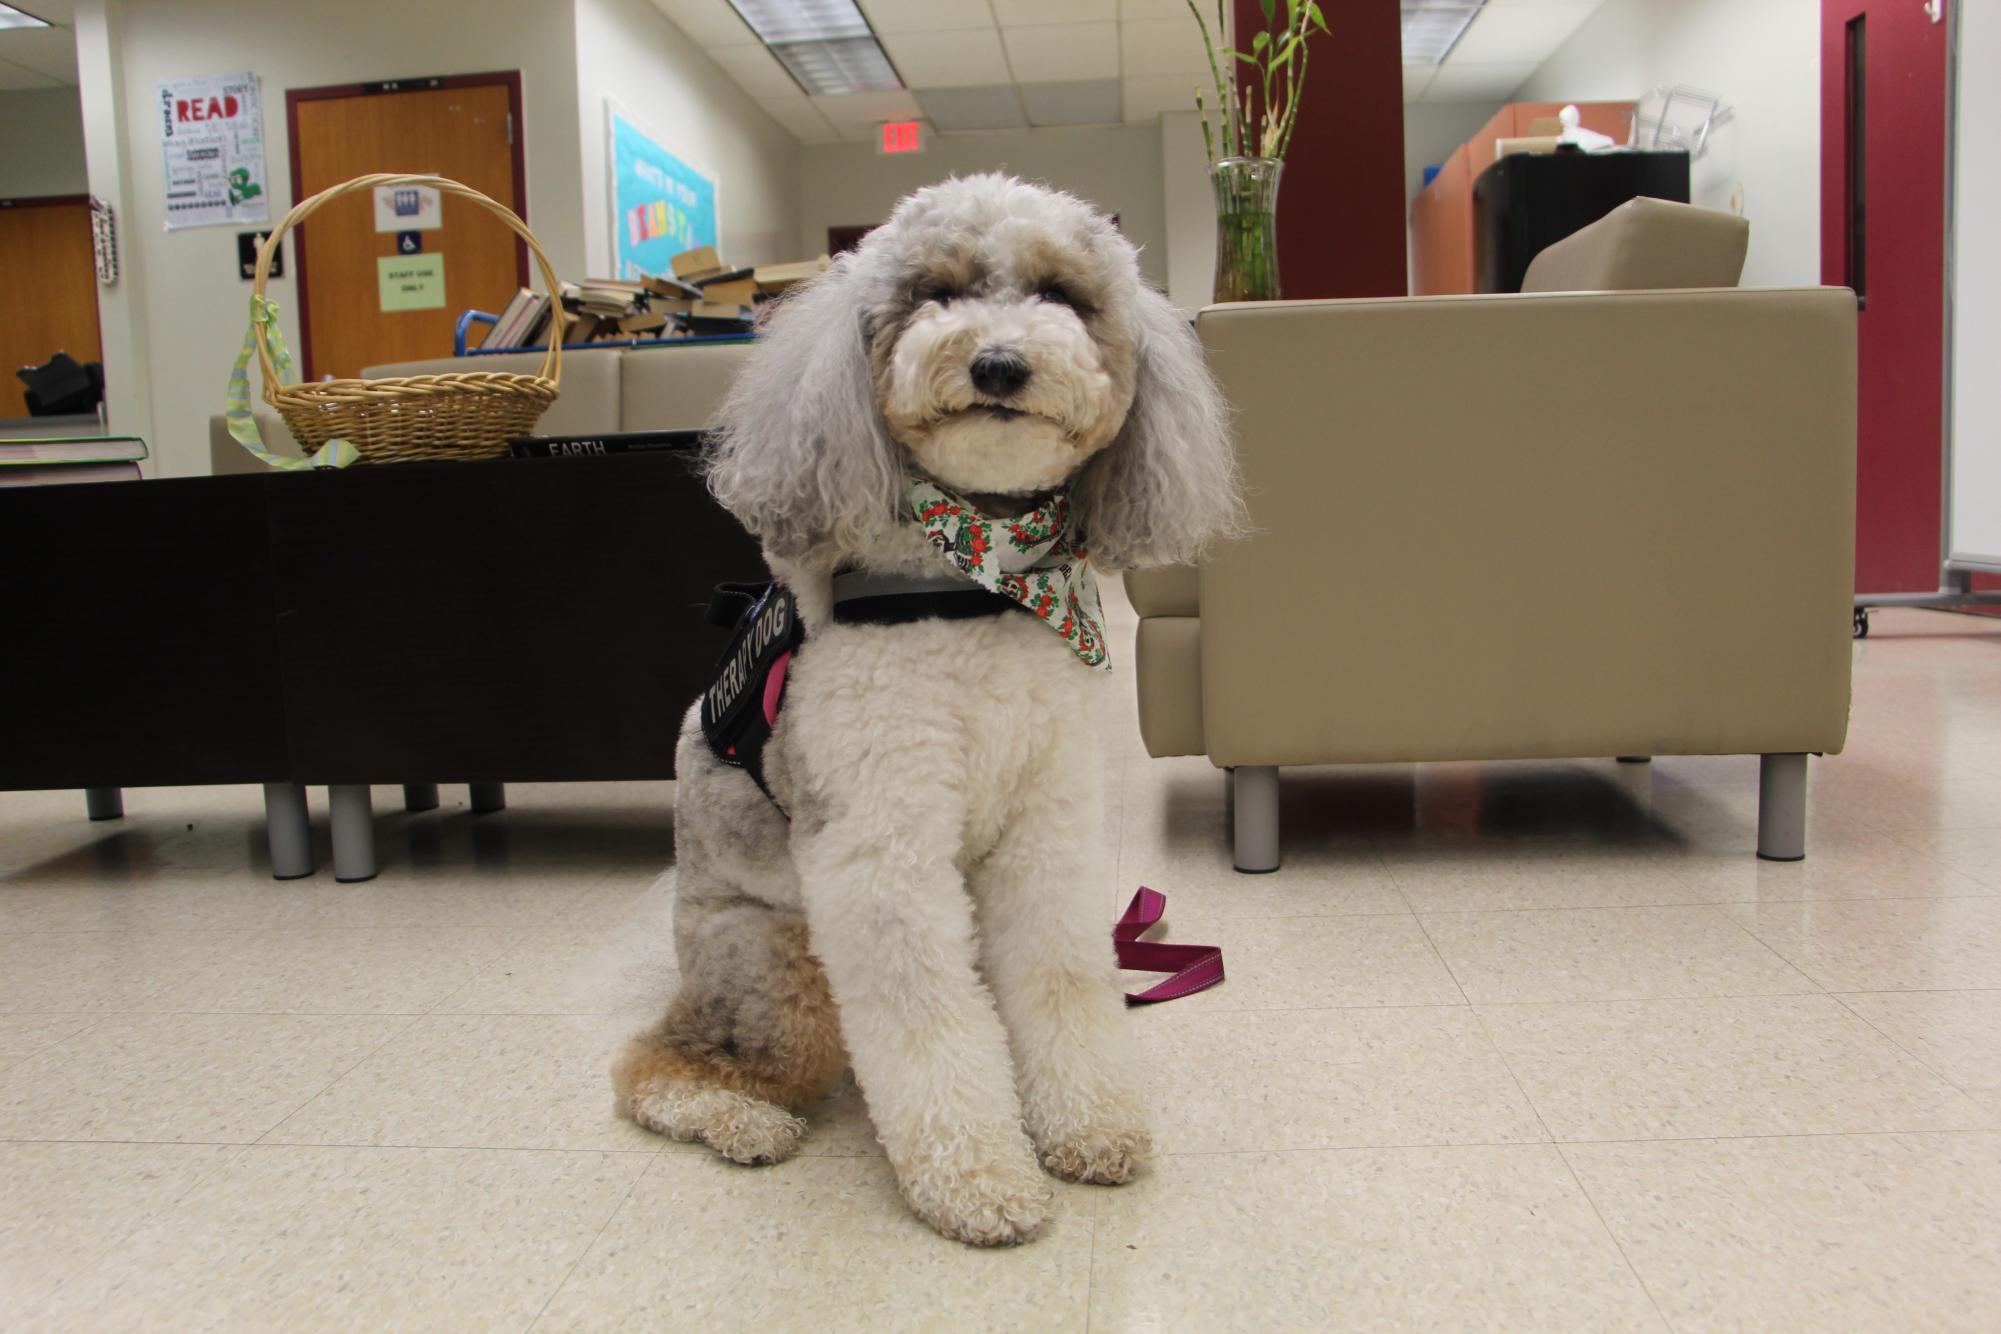 Therapy dog River sits quietly in the media center while her owner, media specialist Diana Haneski, works. Haneski adopted River as her therapy dog in 2018.